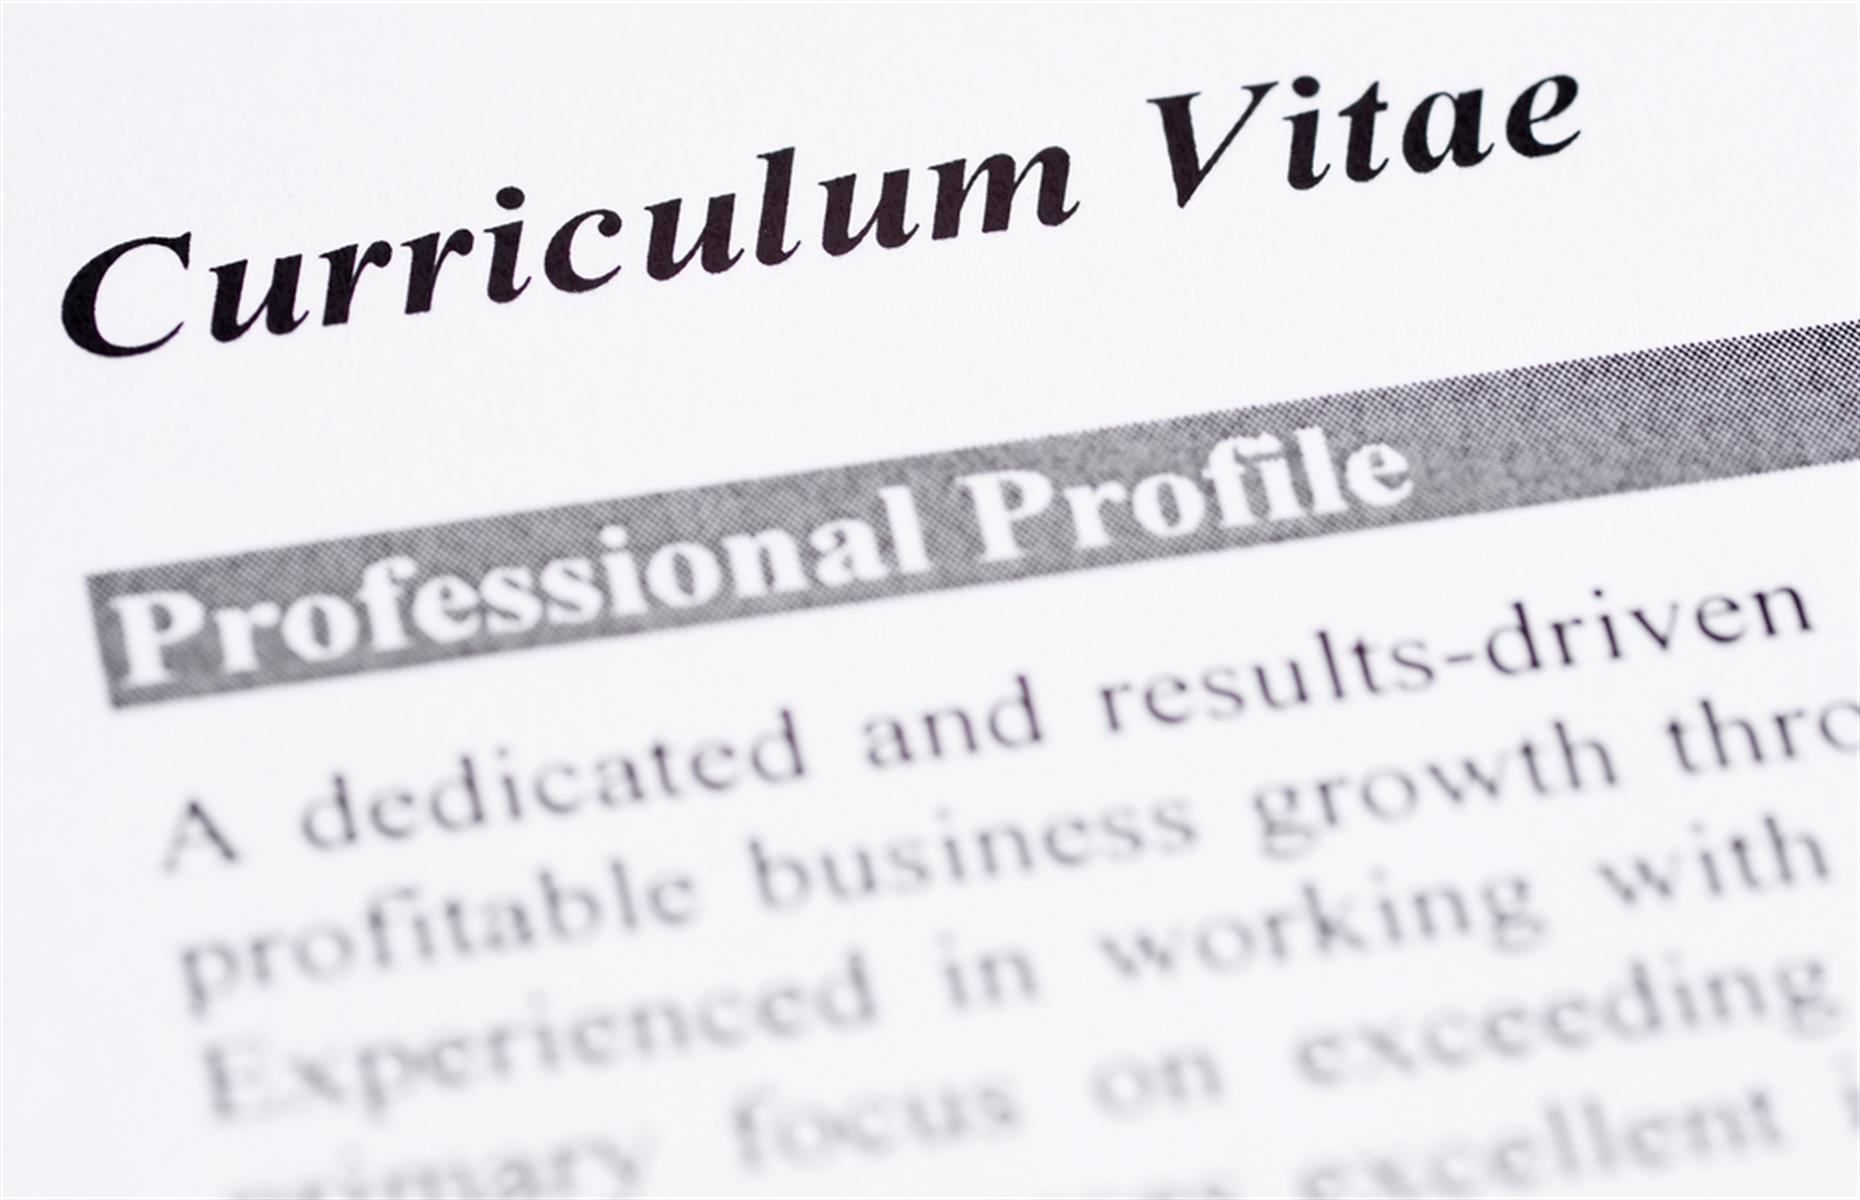 While you want to keep your CV succinct and avoid rambling on, you should always include a personal summary. This paragraph gives you the chance to really sell your skills and achievements, as well as tailoring your application to the specific job you're applying for. It can also help to give your potential new employers a little taste of your personality, and gives you the opportunity to stand out from other candidates.